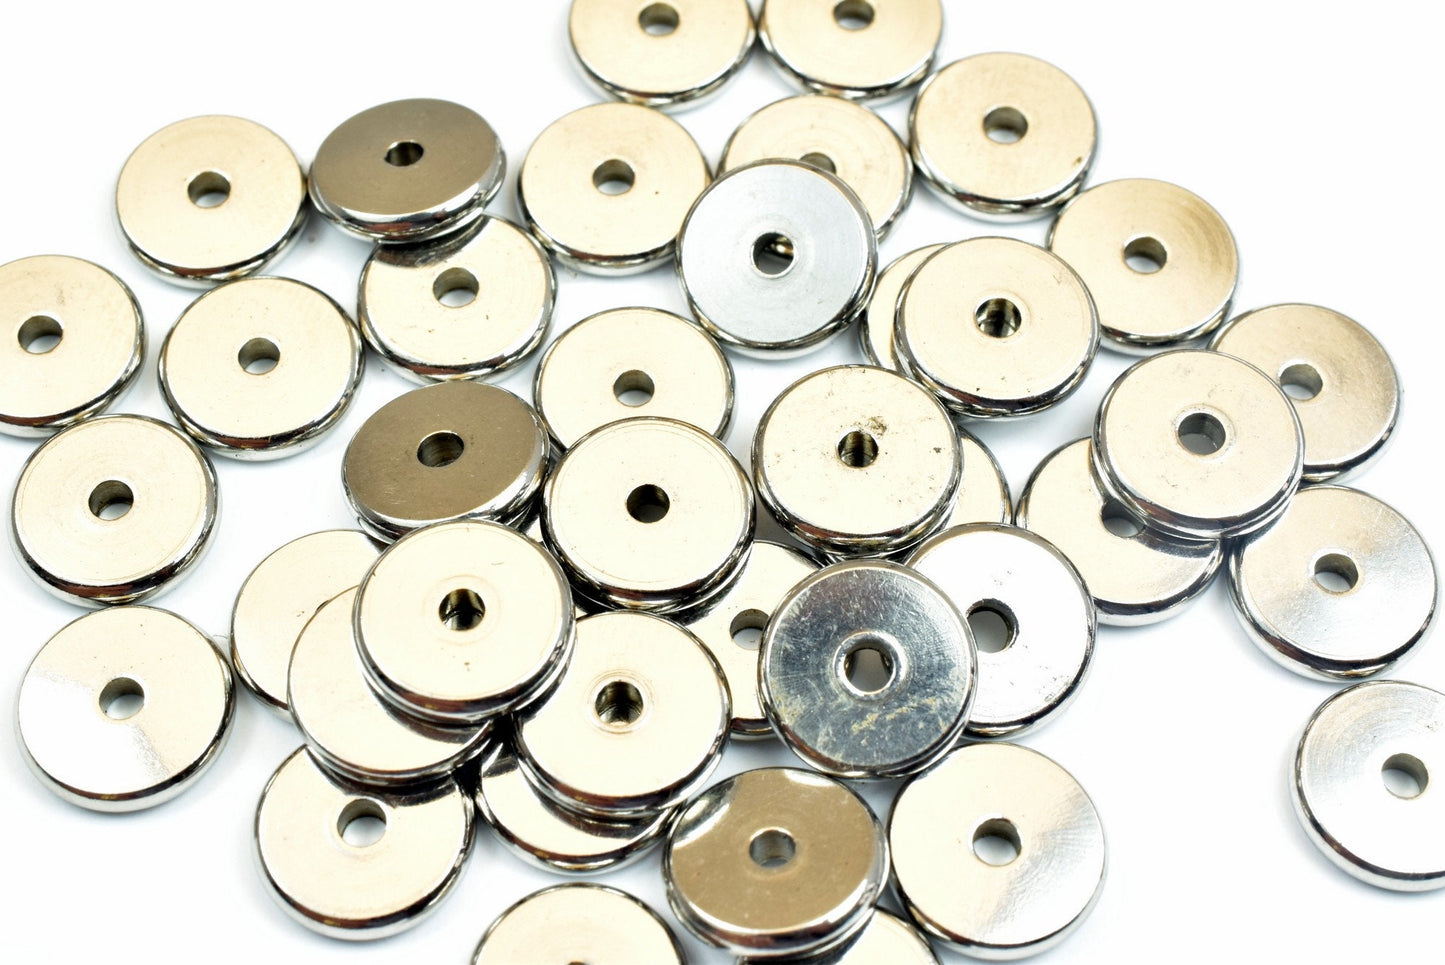 Bulk Stainless Steel Rondelle Plain Spacer Beads Size 6mm, 8mm, 10mm Jewelry Finding Supply For Jewelry Making